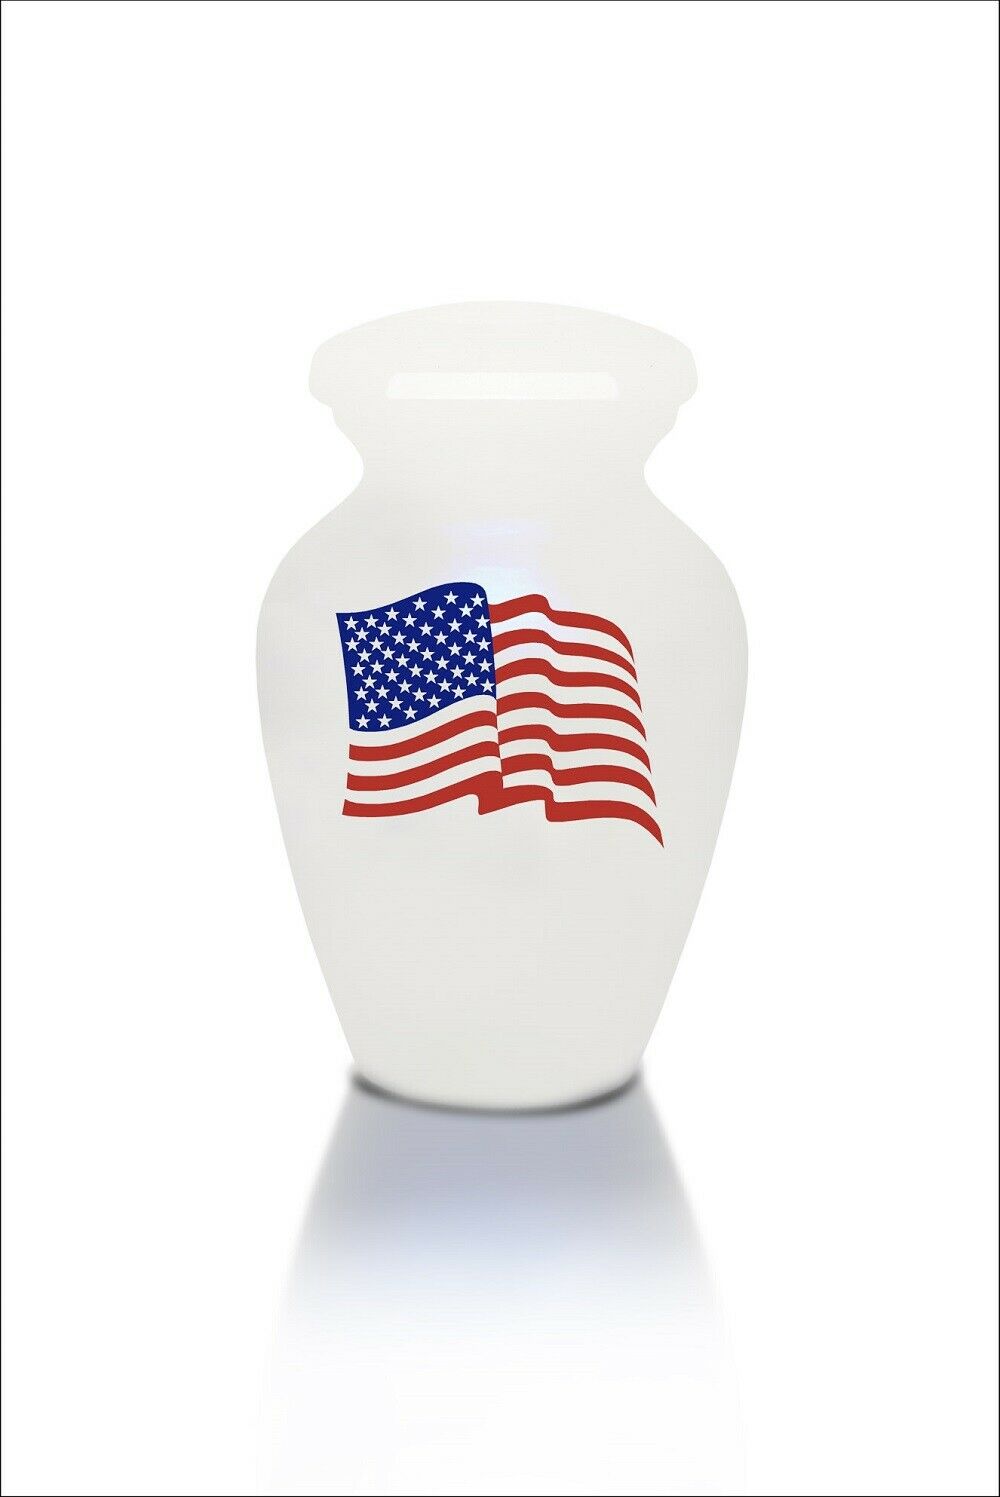 Extra Small 3 Cubic Inch White with American Flag Alloy Funeral Cremation Urn